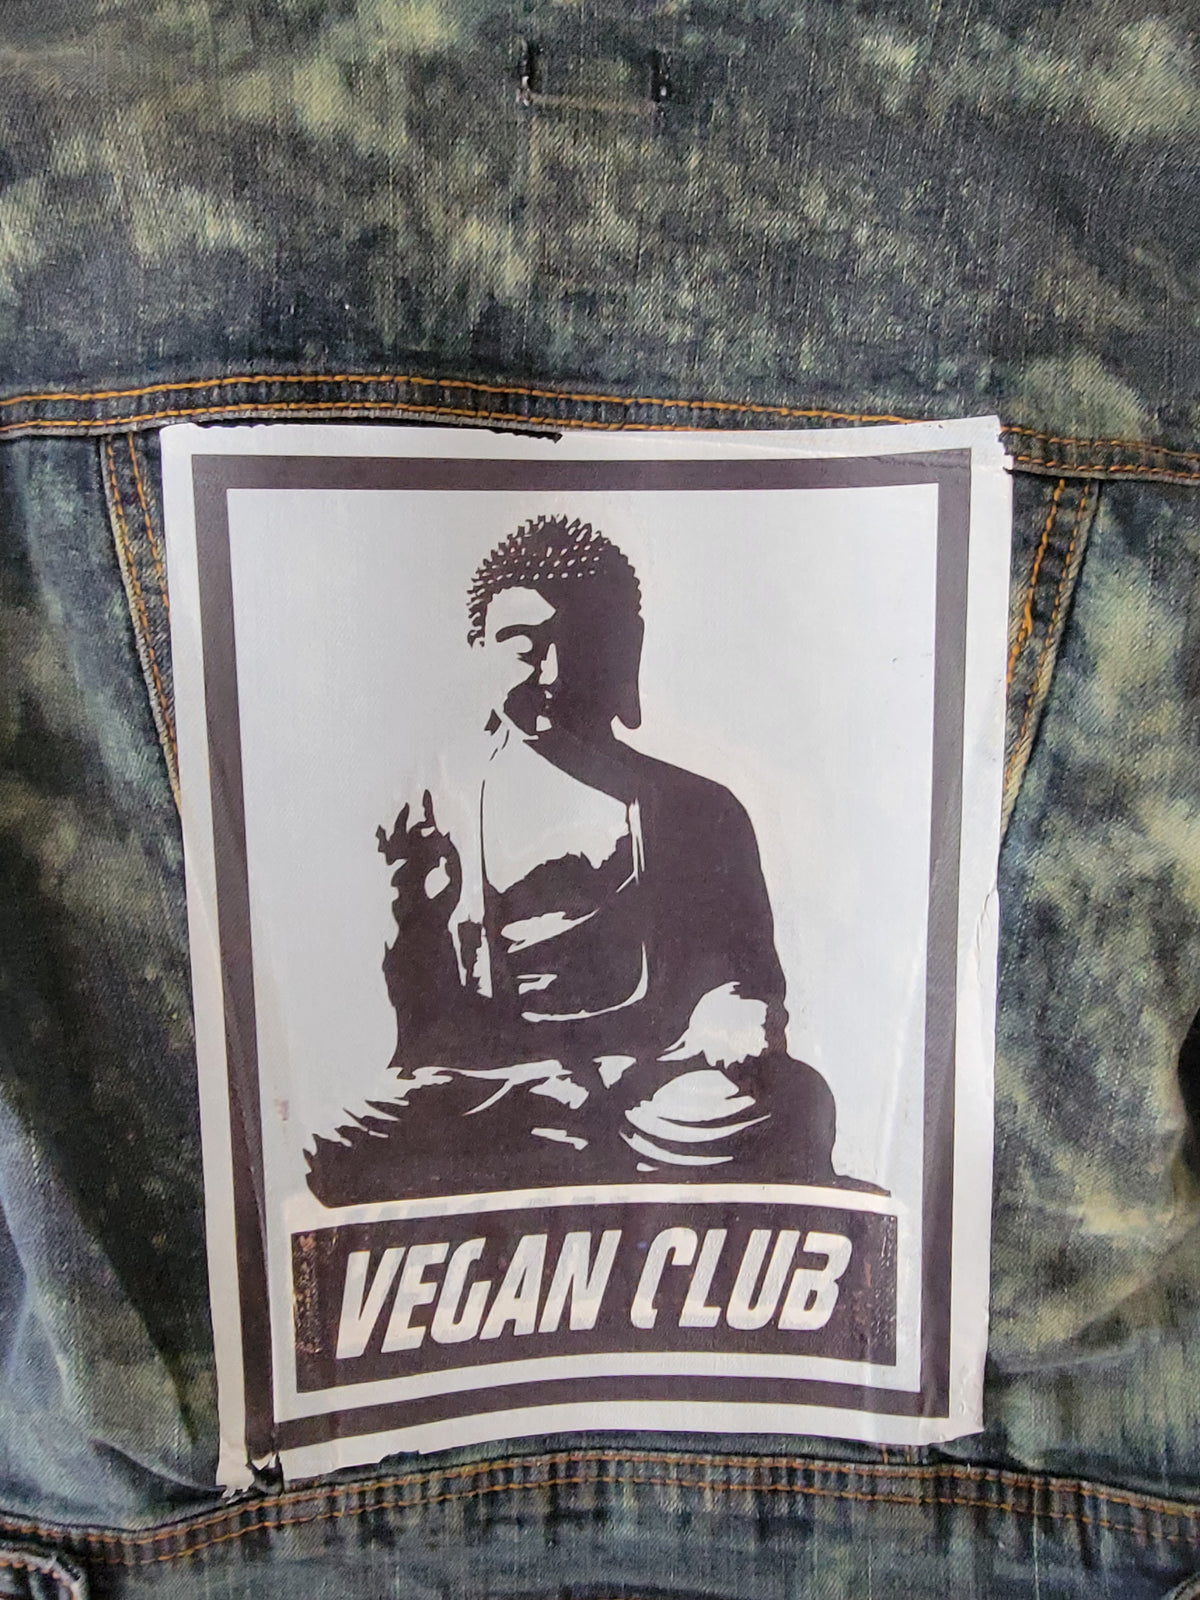 One of a Kind Upcycled Club Jean Jacket feat Buddha - SOLD